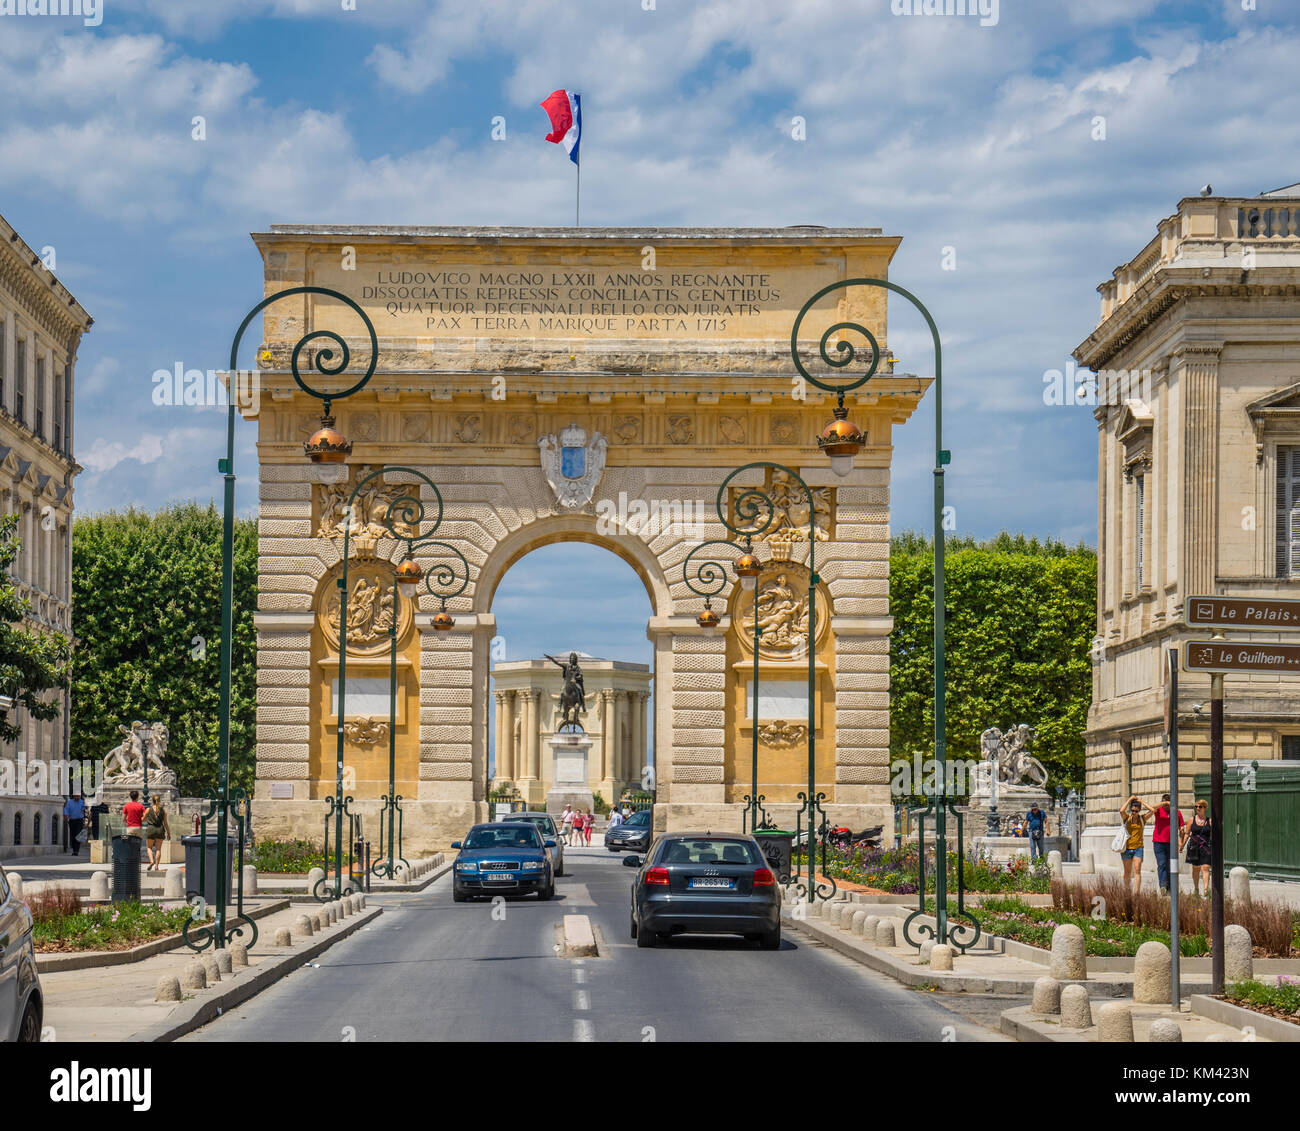 France, Hérault department, Montpellier, Porte du Peyrou, view of the triumphal arch from Rue Foch Stock Photo